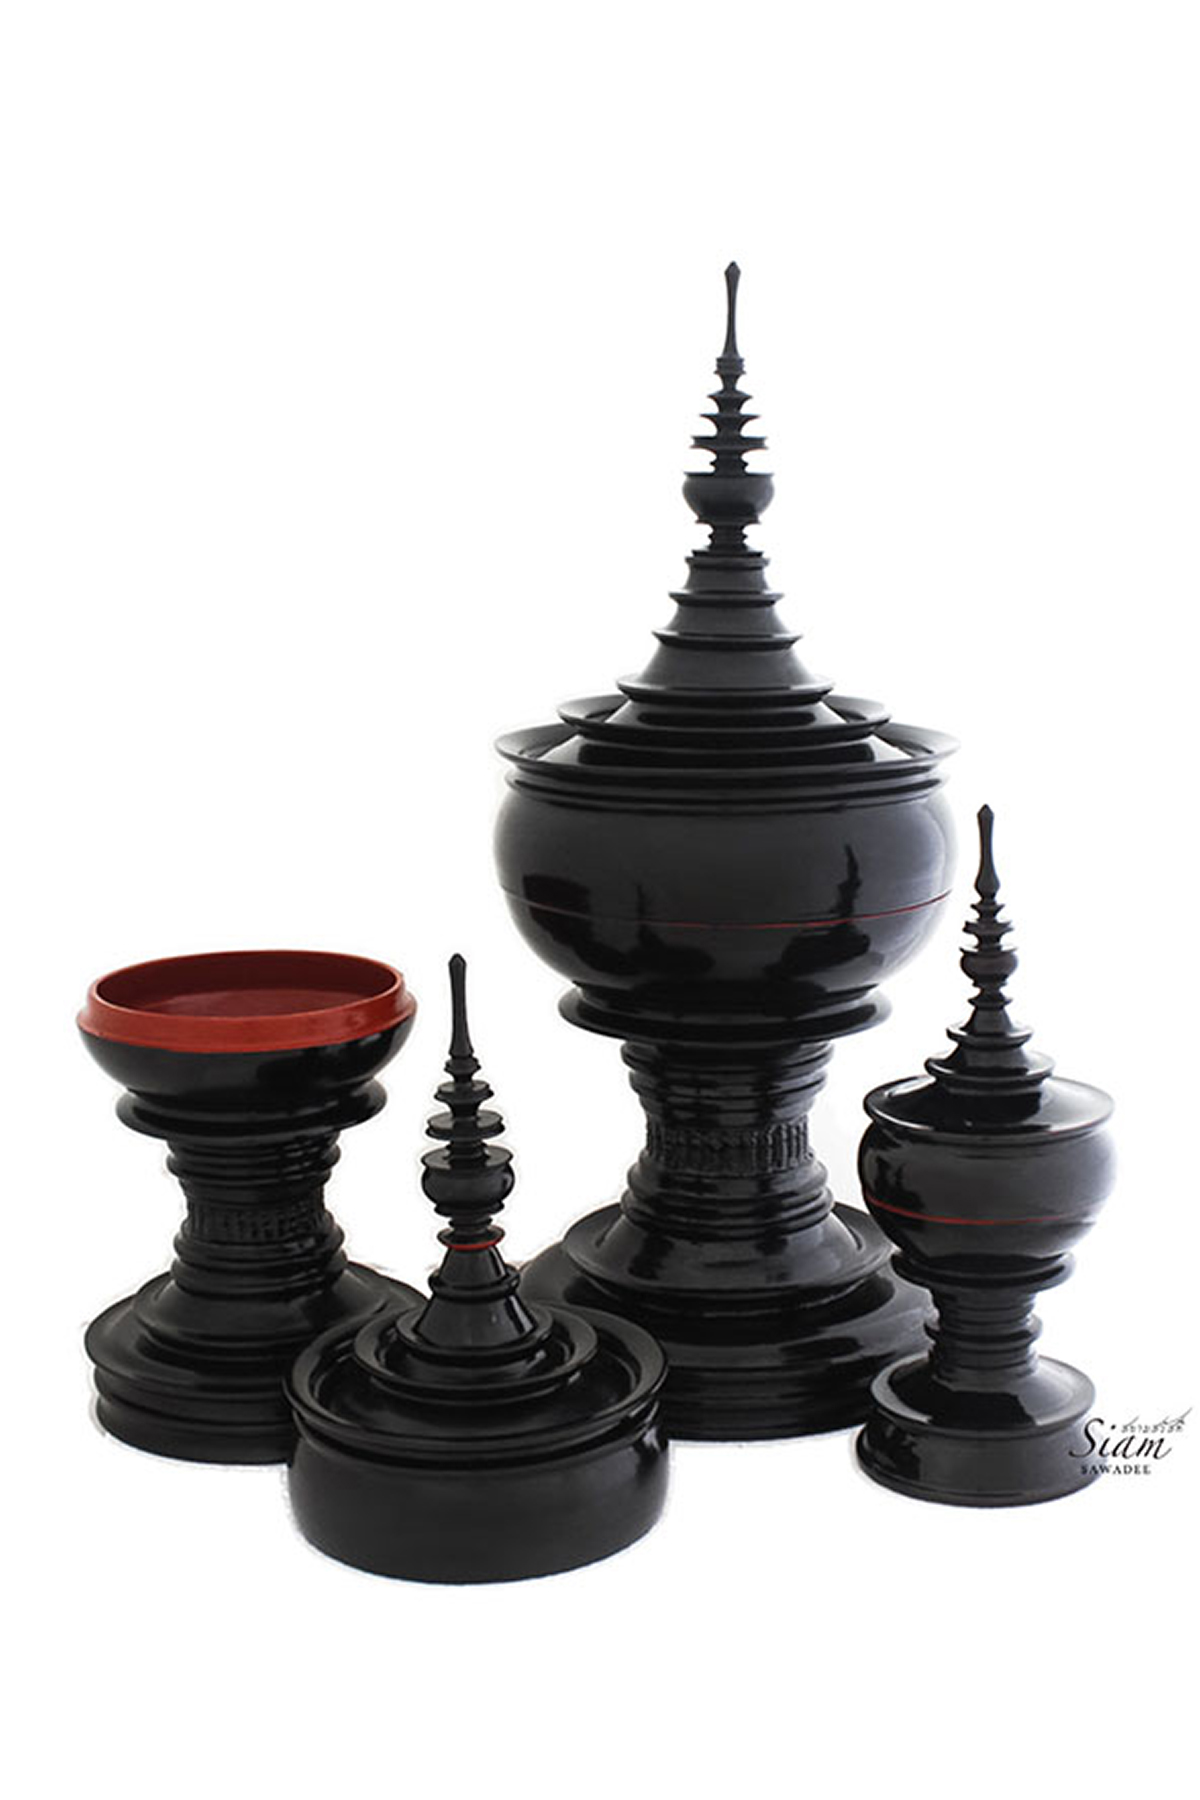 Buddhist-Food-Offering-Vessel-Handmade-Traditional-Stupa-shaped-in-Black-color-from-Myanmar-Oriental-Decor